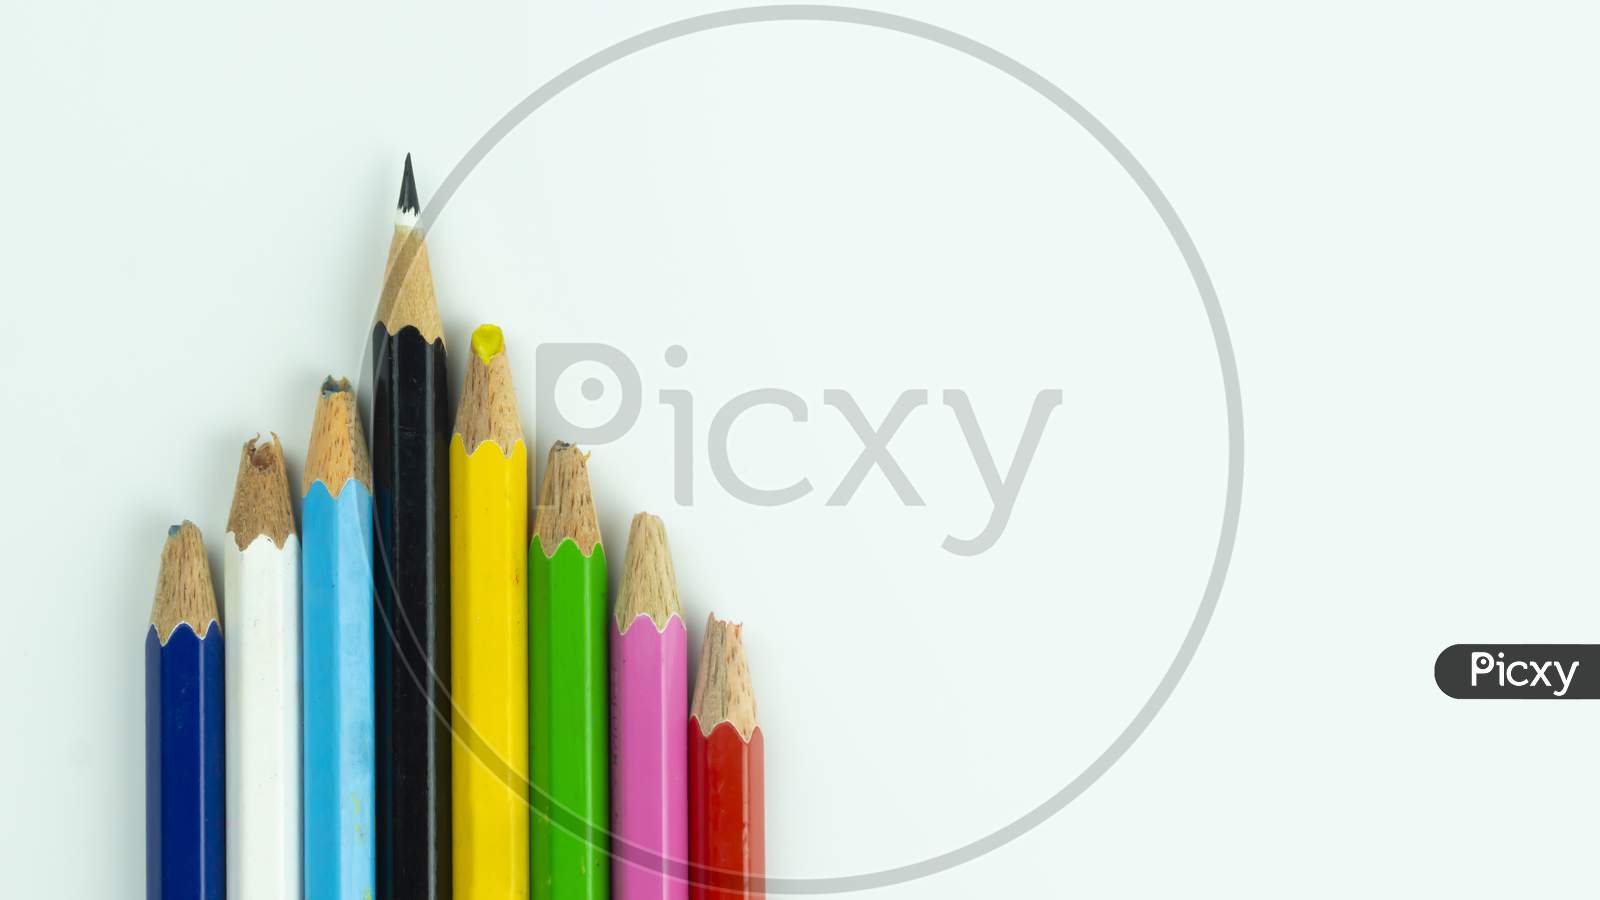 Colourful pencils are kept but only one pencil are clearly can be used to represent performance and leadership concept